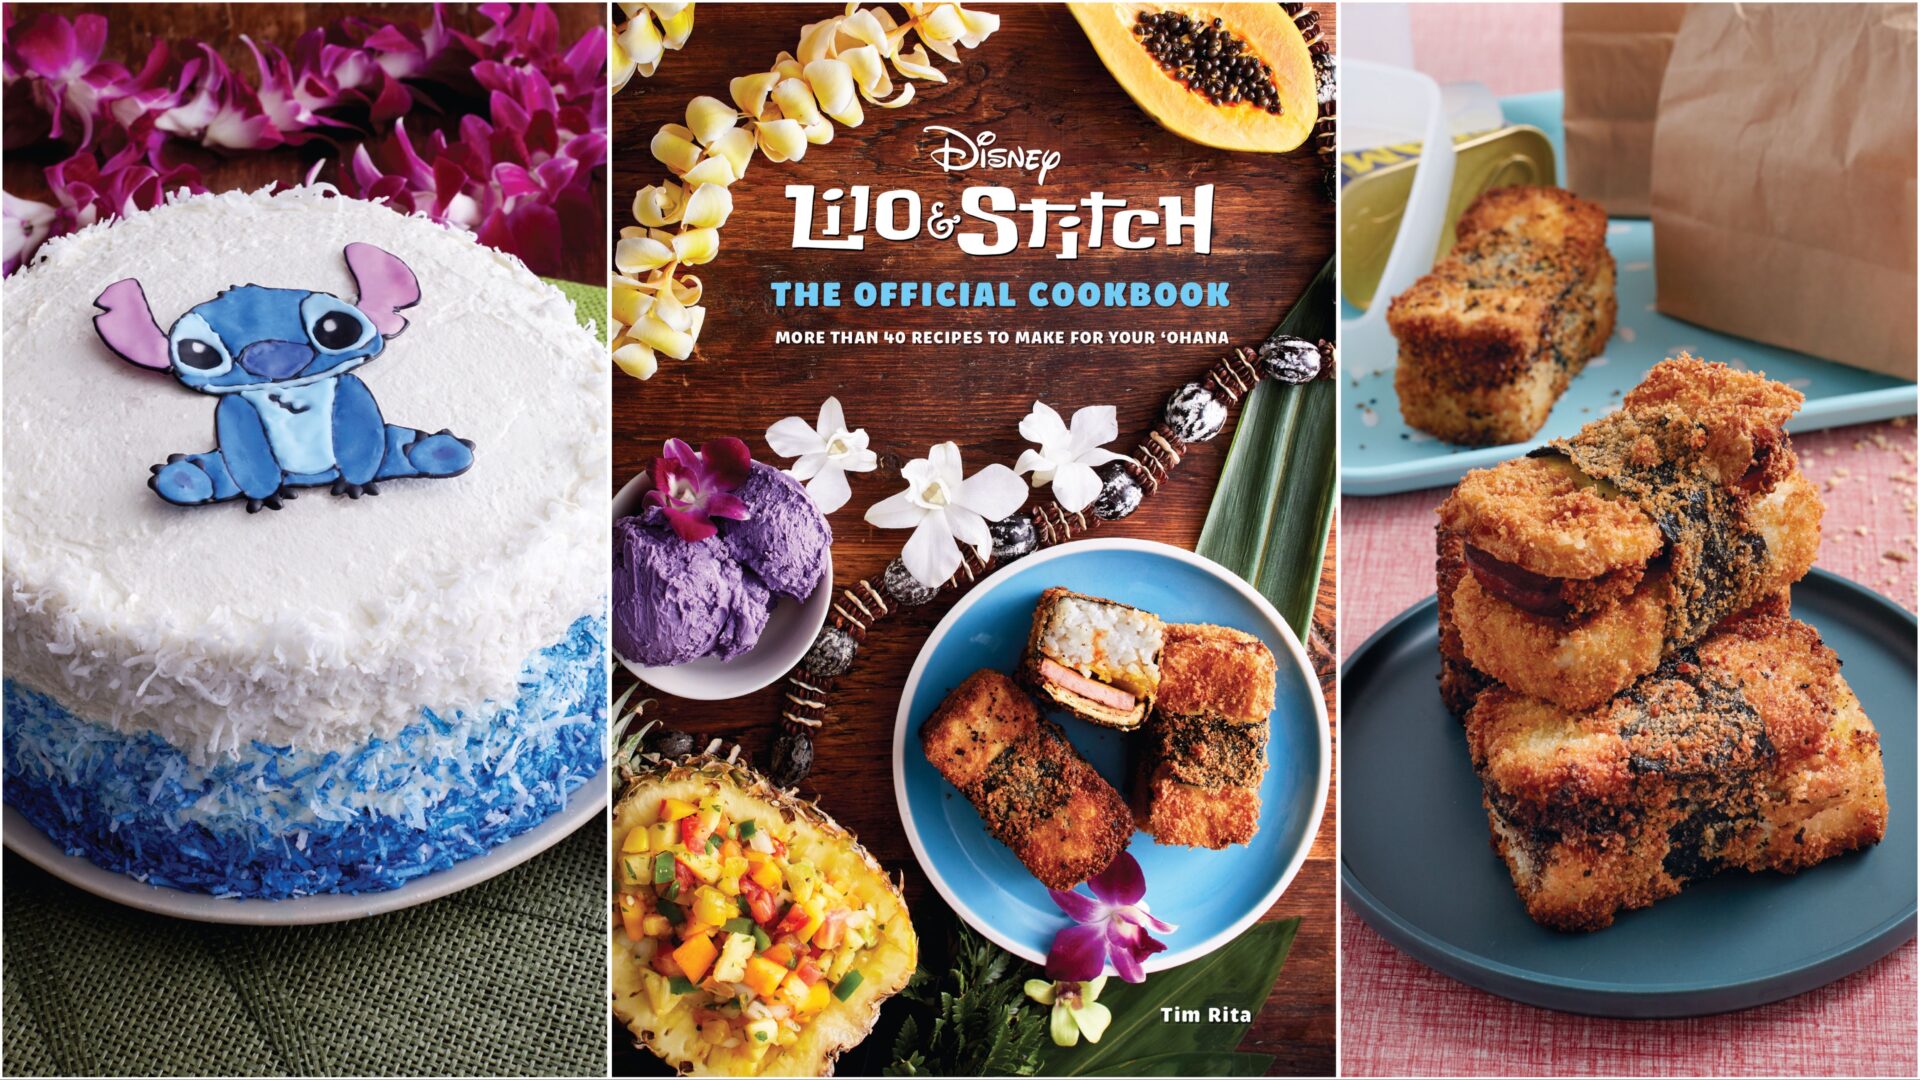 New Lilo & Stitch The Official Cookbook With More Than 50 Delicious Recipes!